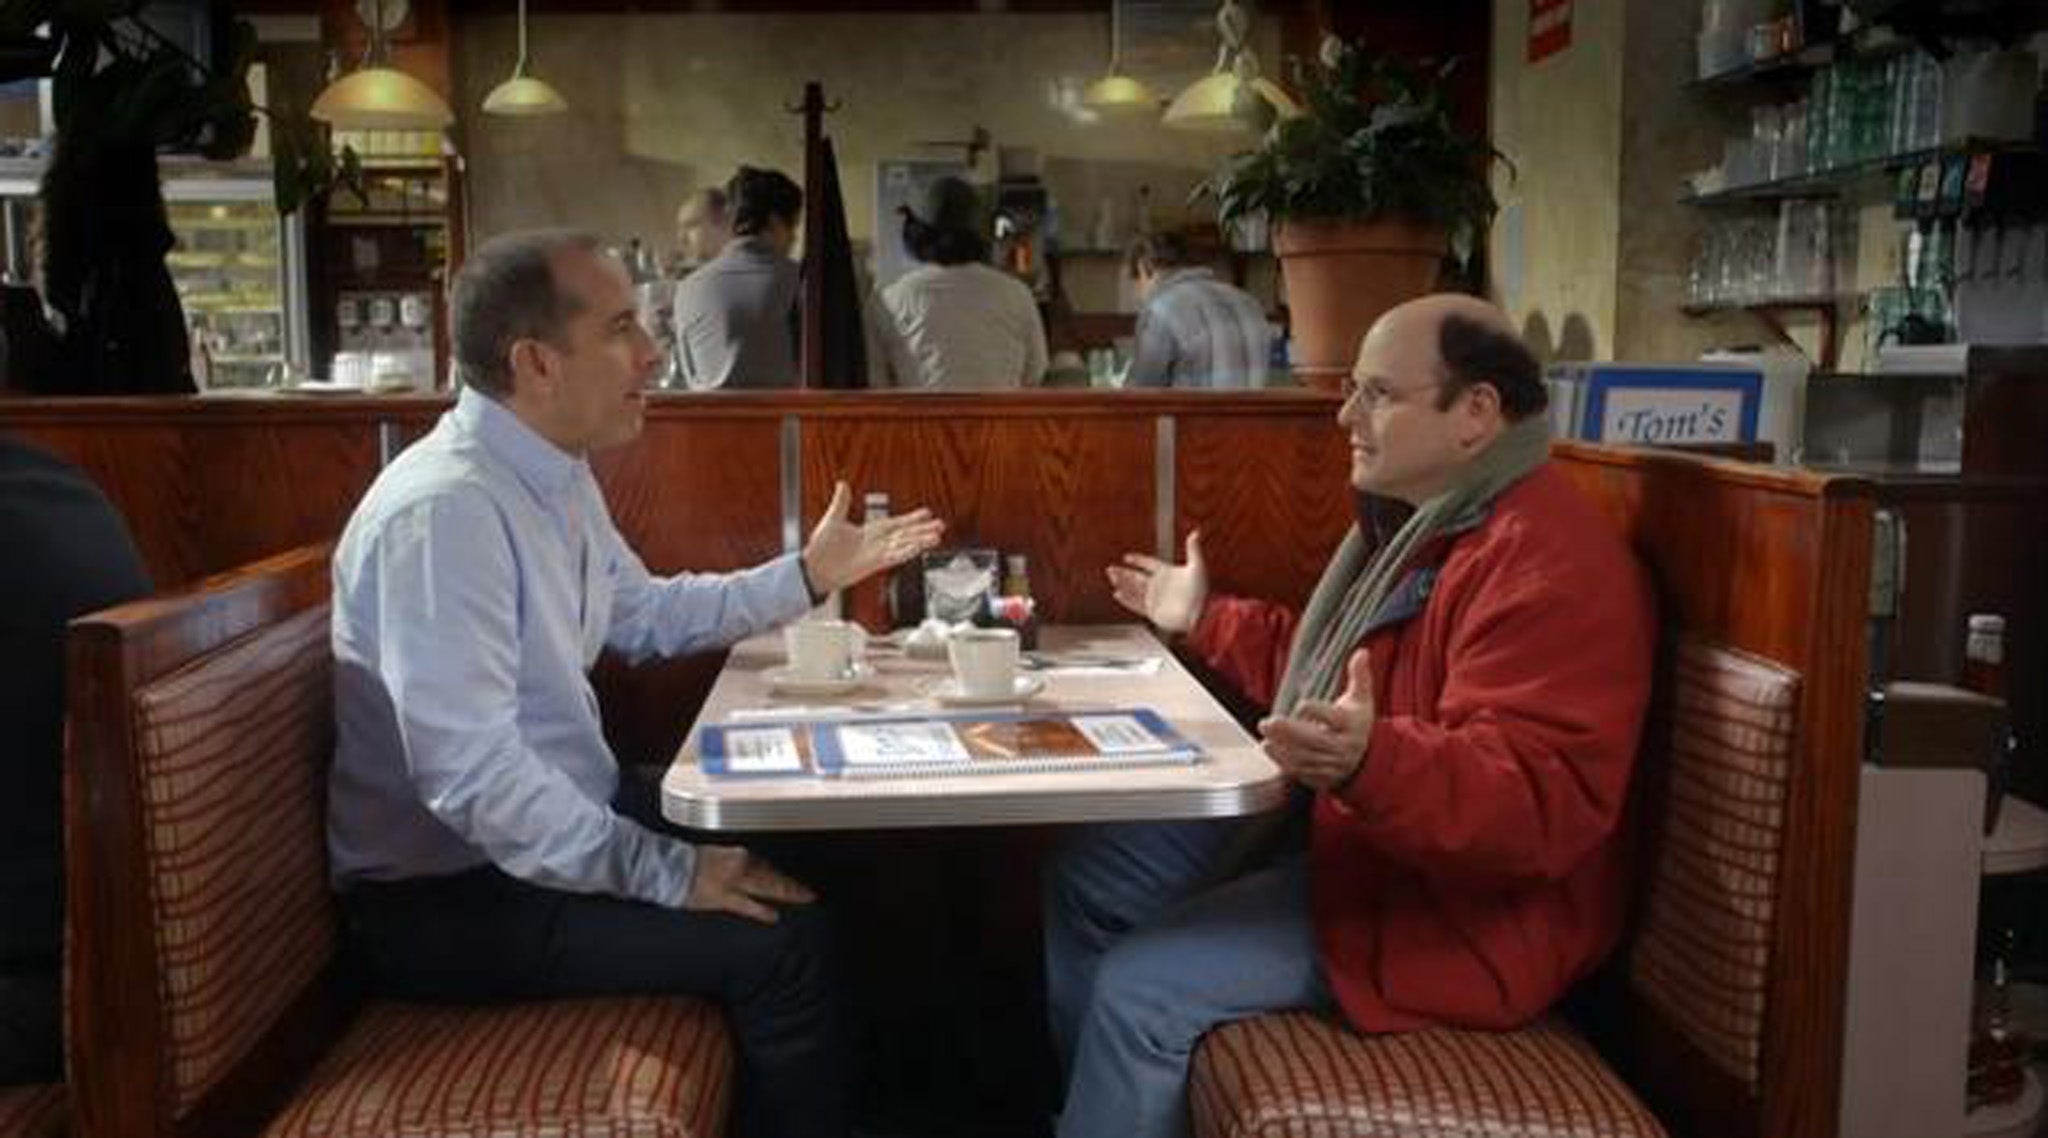 Jerry Seinfeld and Jason Alexander appear in a teaser for 'Comedians in Cars Getting Coffee' during the Super Bowl